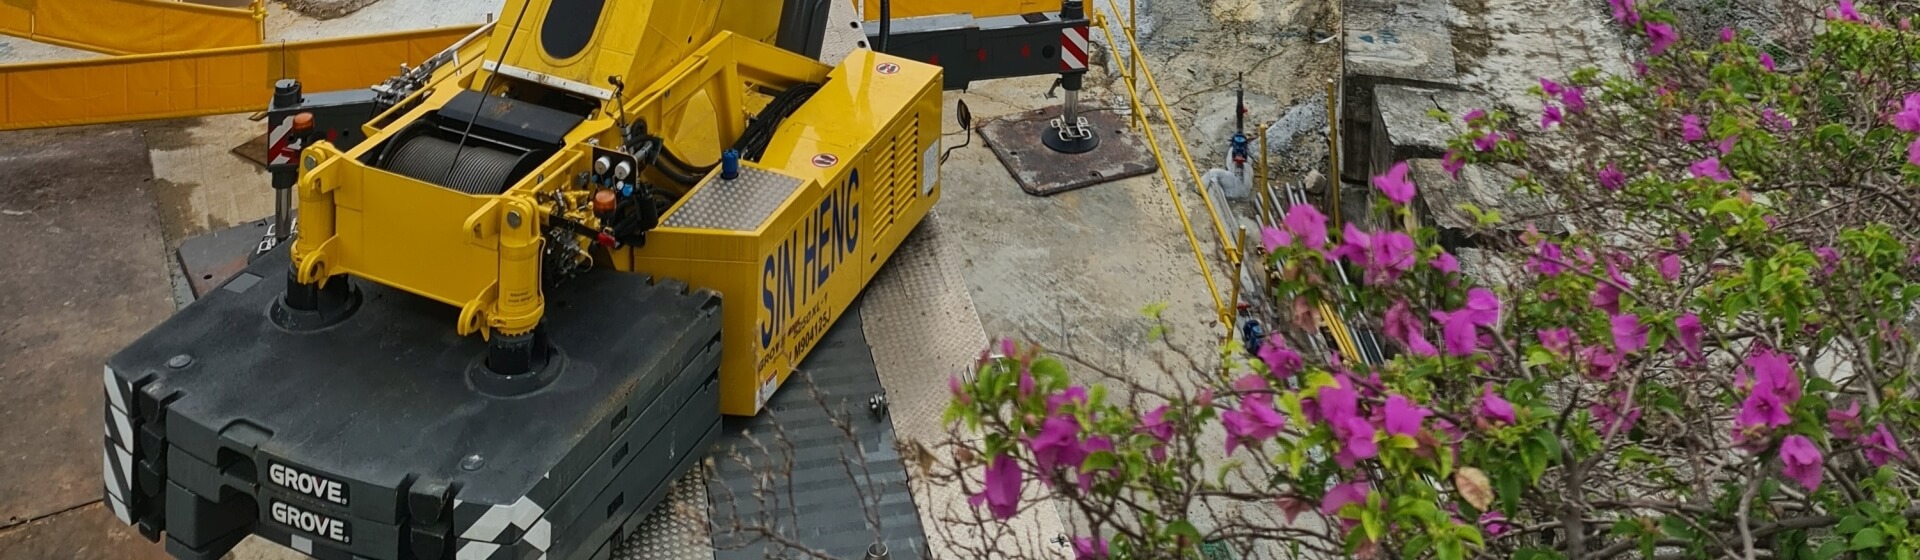 Singapores-first-Grove-GMK5250XL-1-delivered-to-Sin-Heng-Heavy-Machinery-01.jpg